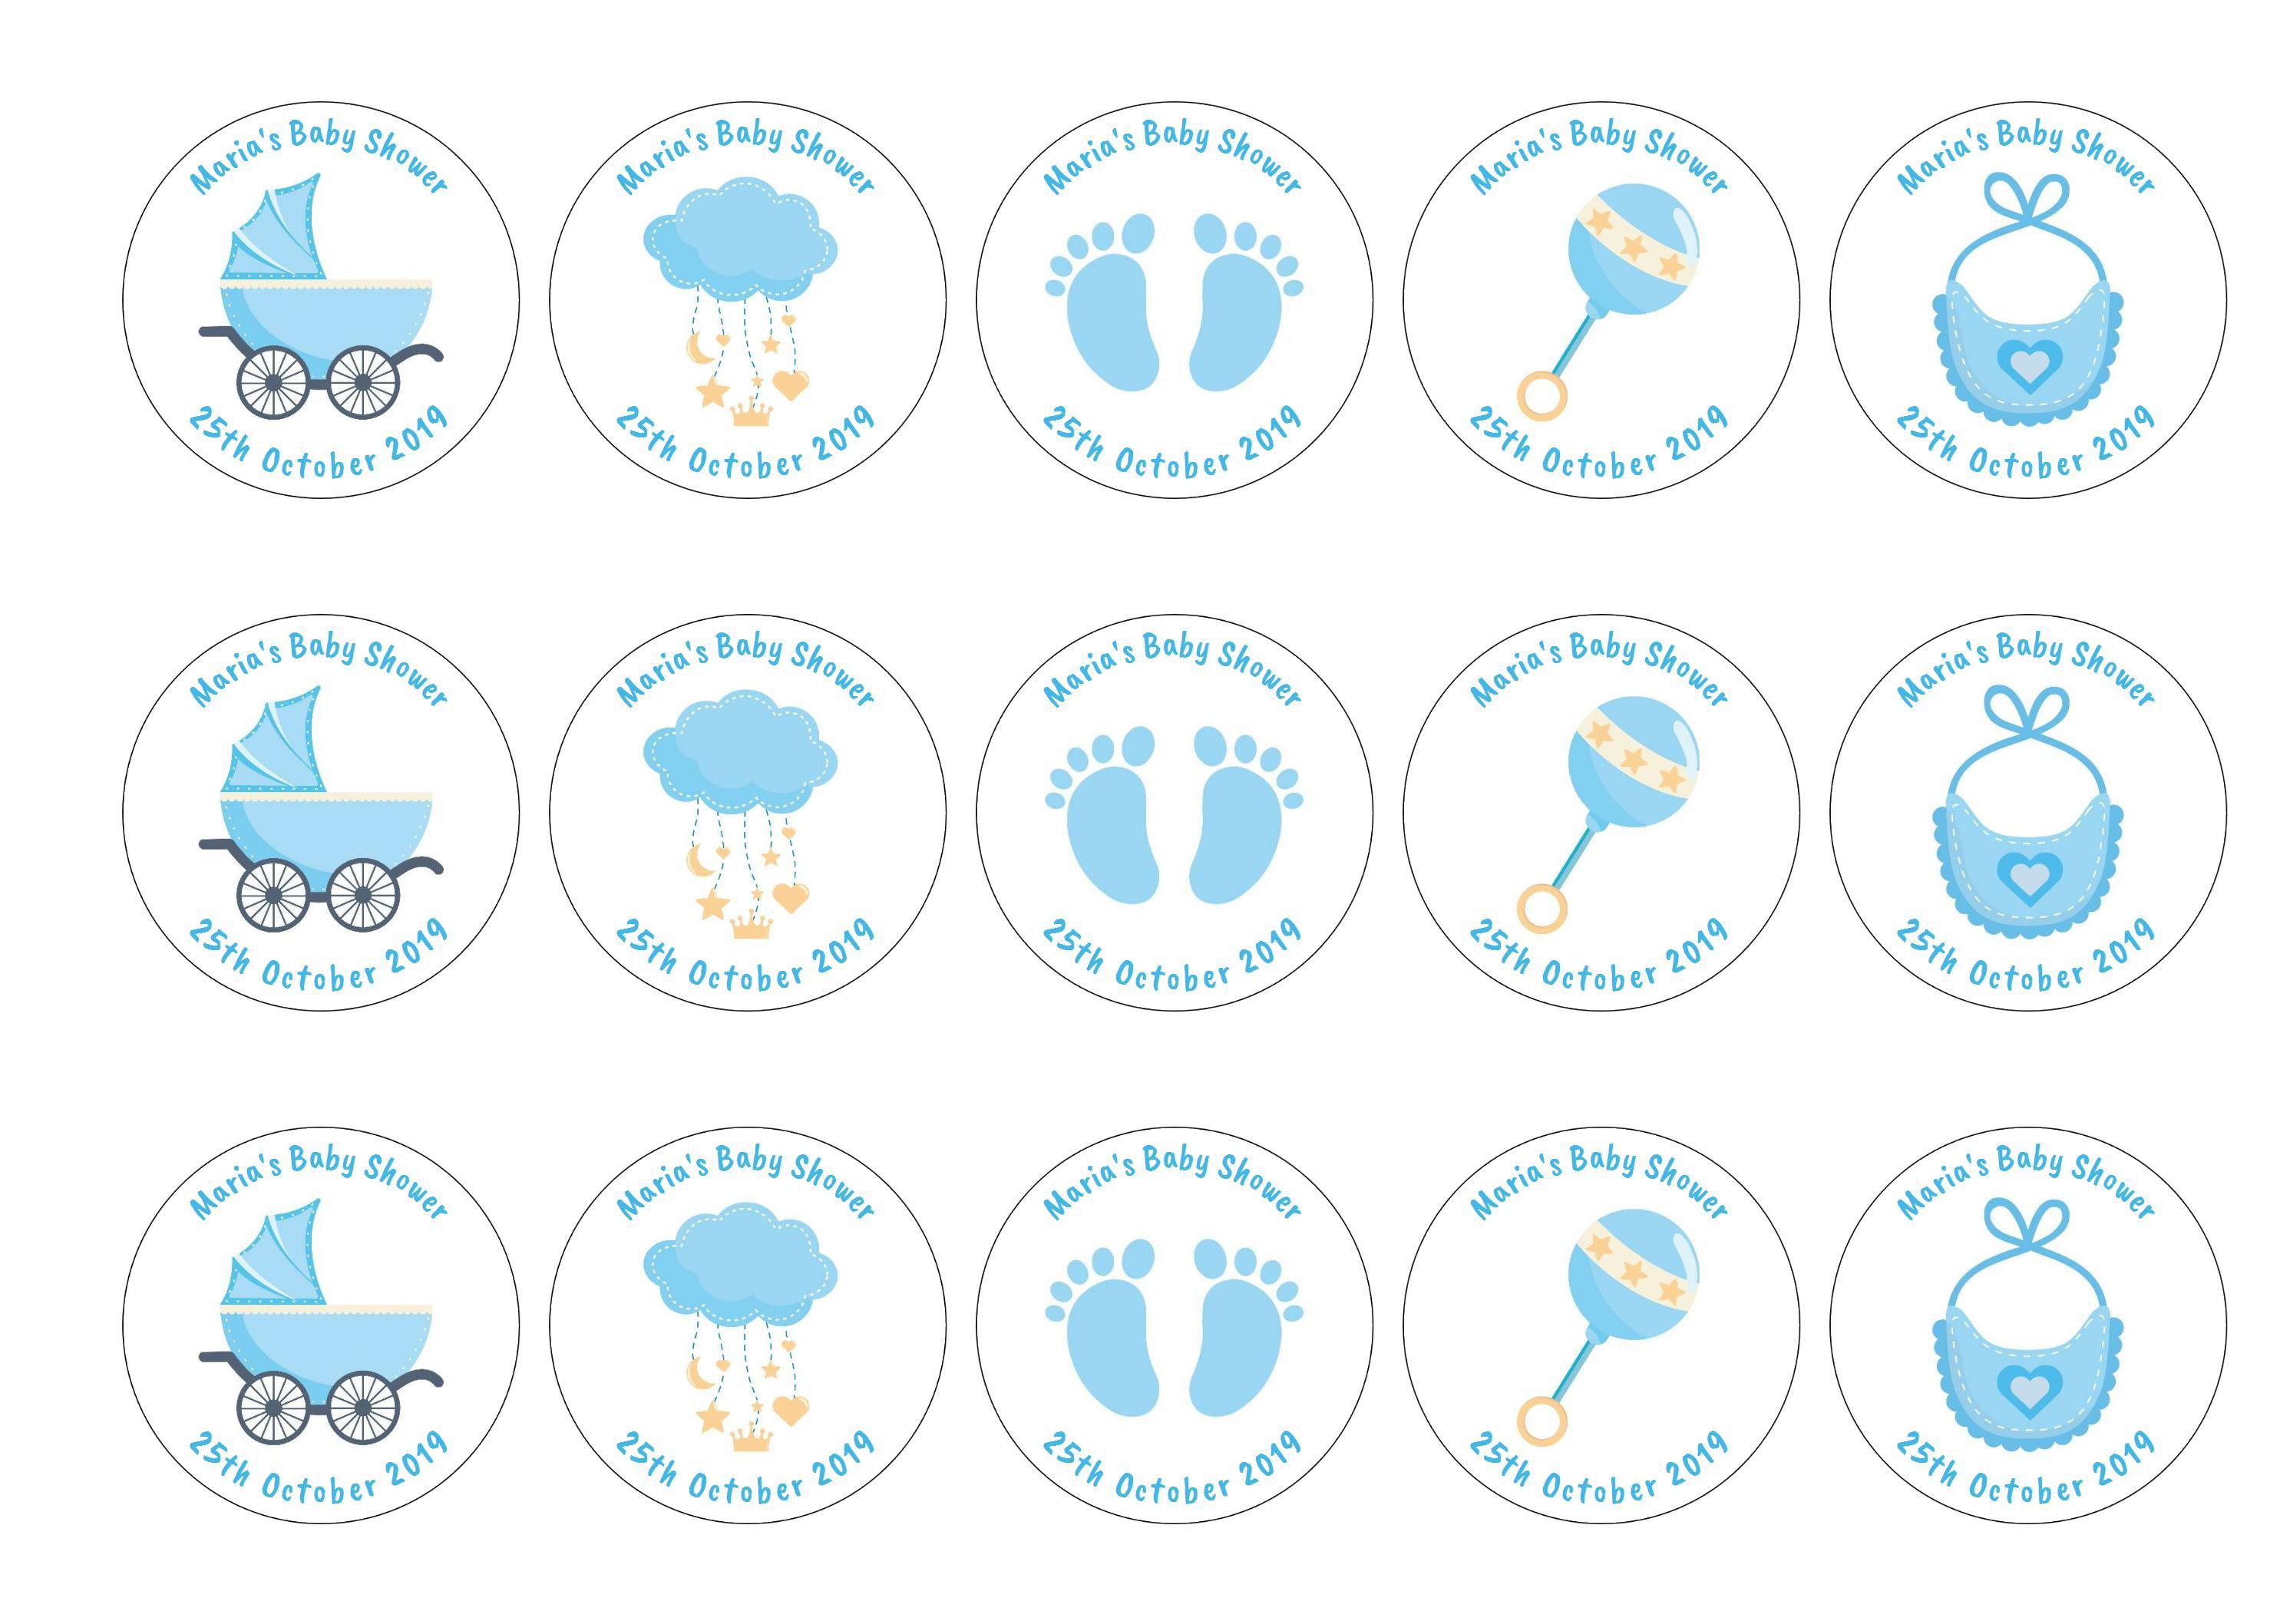 15 baby shower toppers with blue baby icons